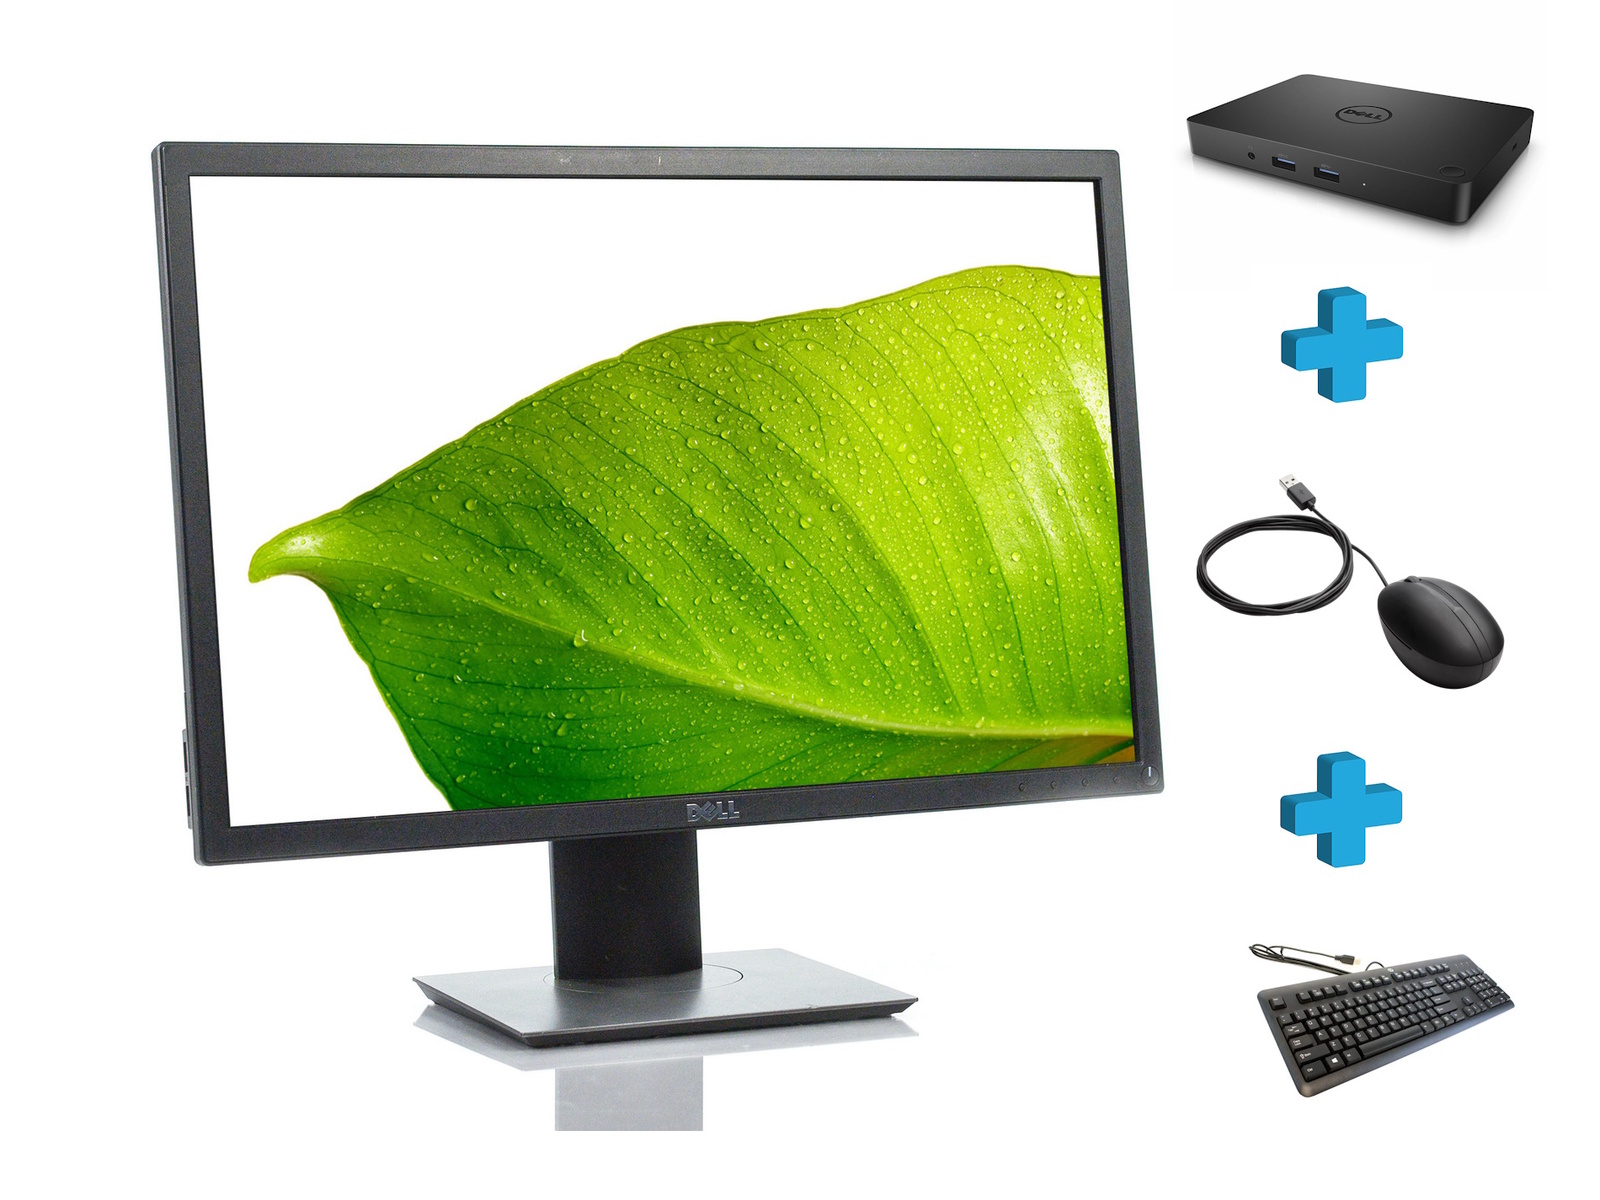 22" LCD Monitor + Docking Station Combo - Back to Work & Study Full Size Image